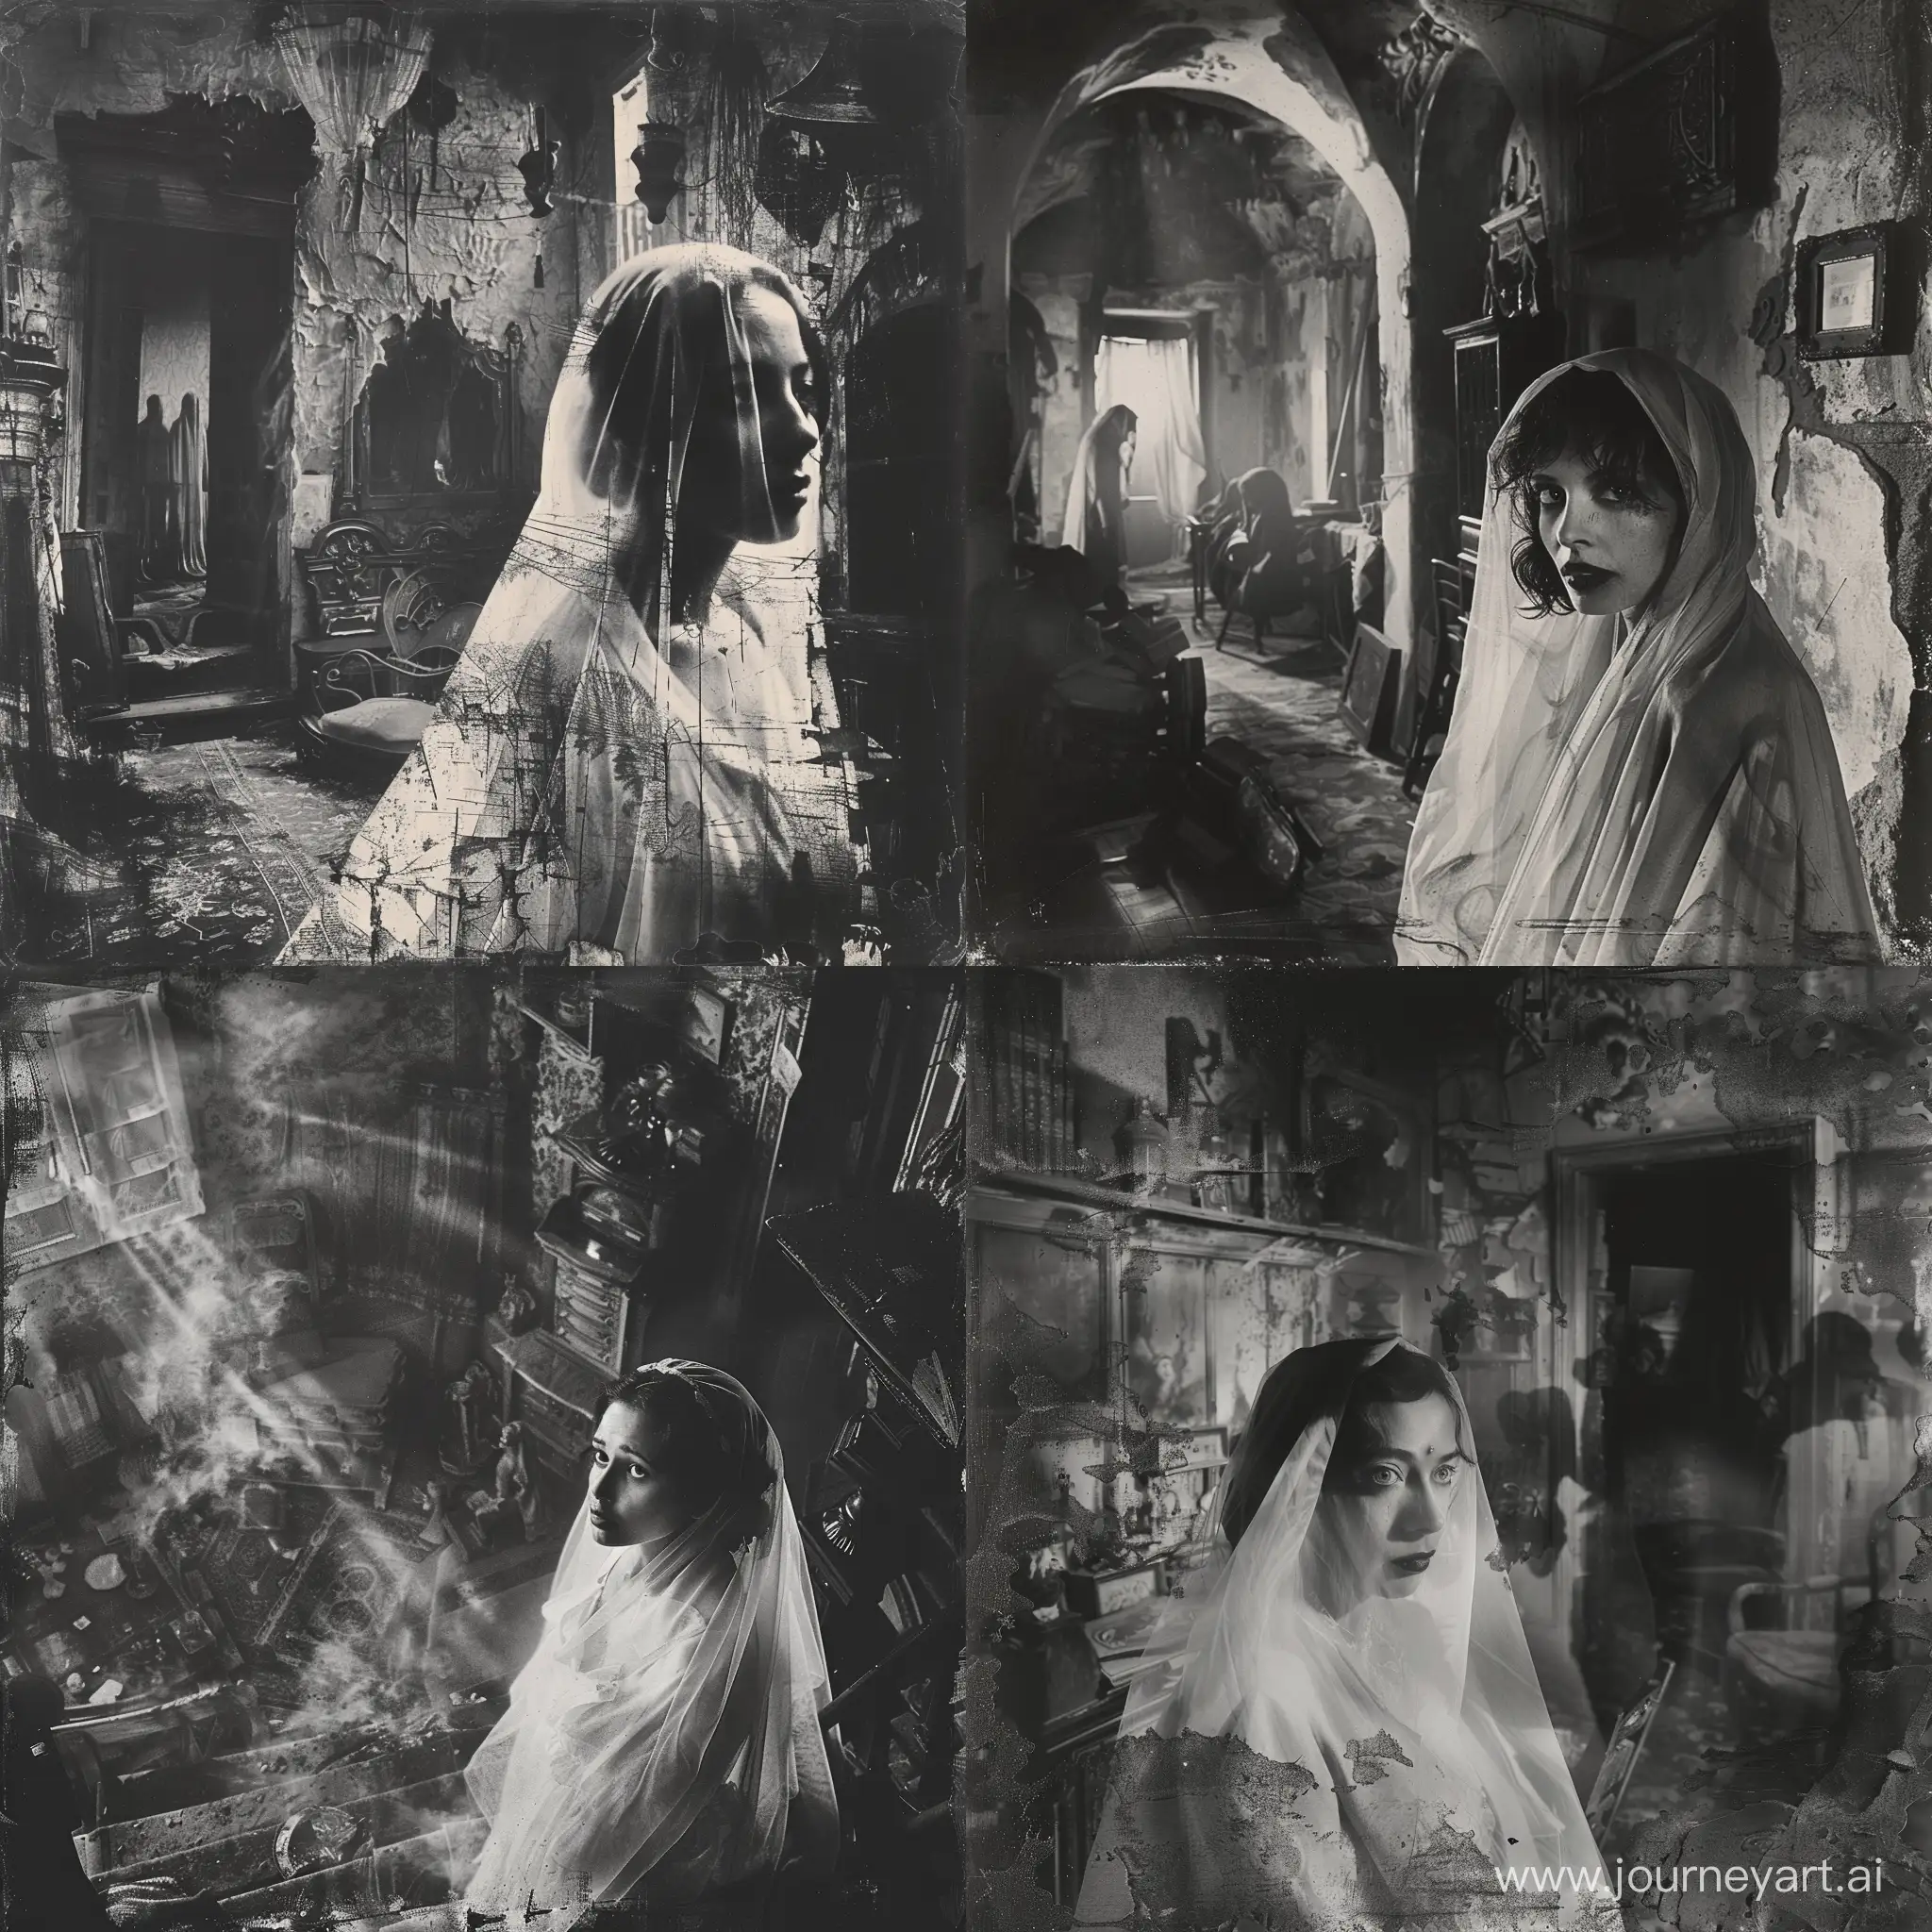 A black and white photograph of a hauntingly beautiful woman with a white veil, standing in a dimly lit, cluttered room. The room is filled with shadowy figures and antique furniture, adding to the eerie atmosphere. The woman's expression is both captivating and unsettling, evoking a sense of mystery and foreboding. The image is highly detailed, showcasing textures and intricate details. --ar 1:1 --s 150